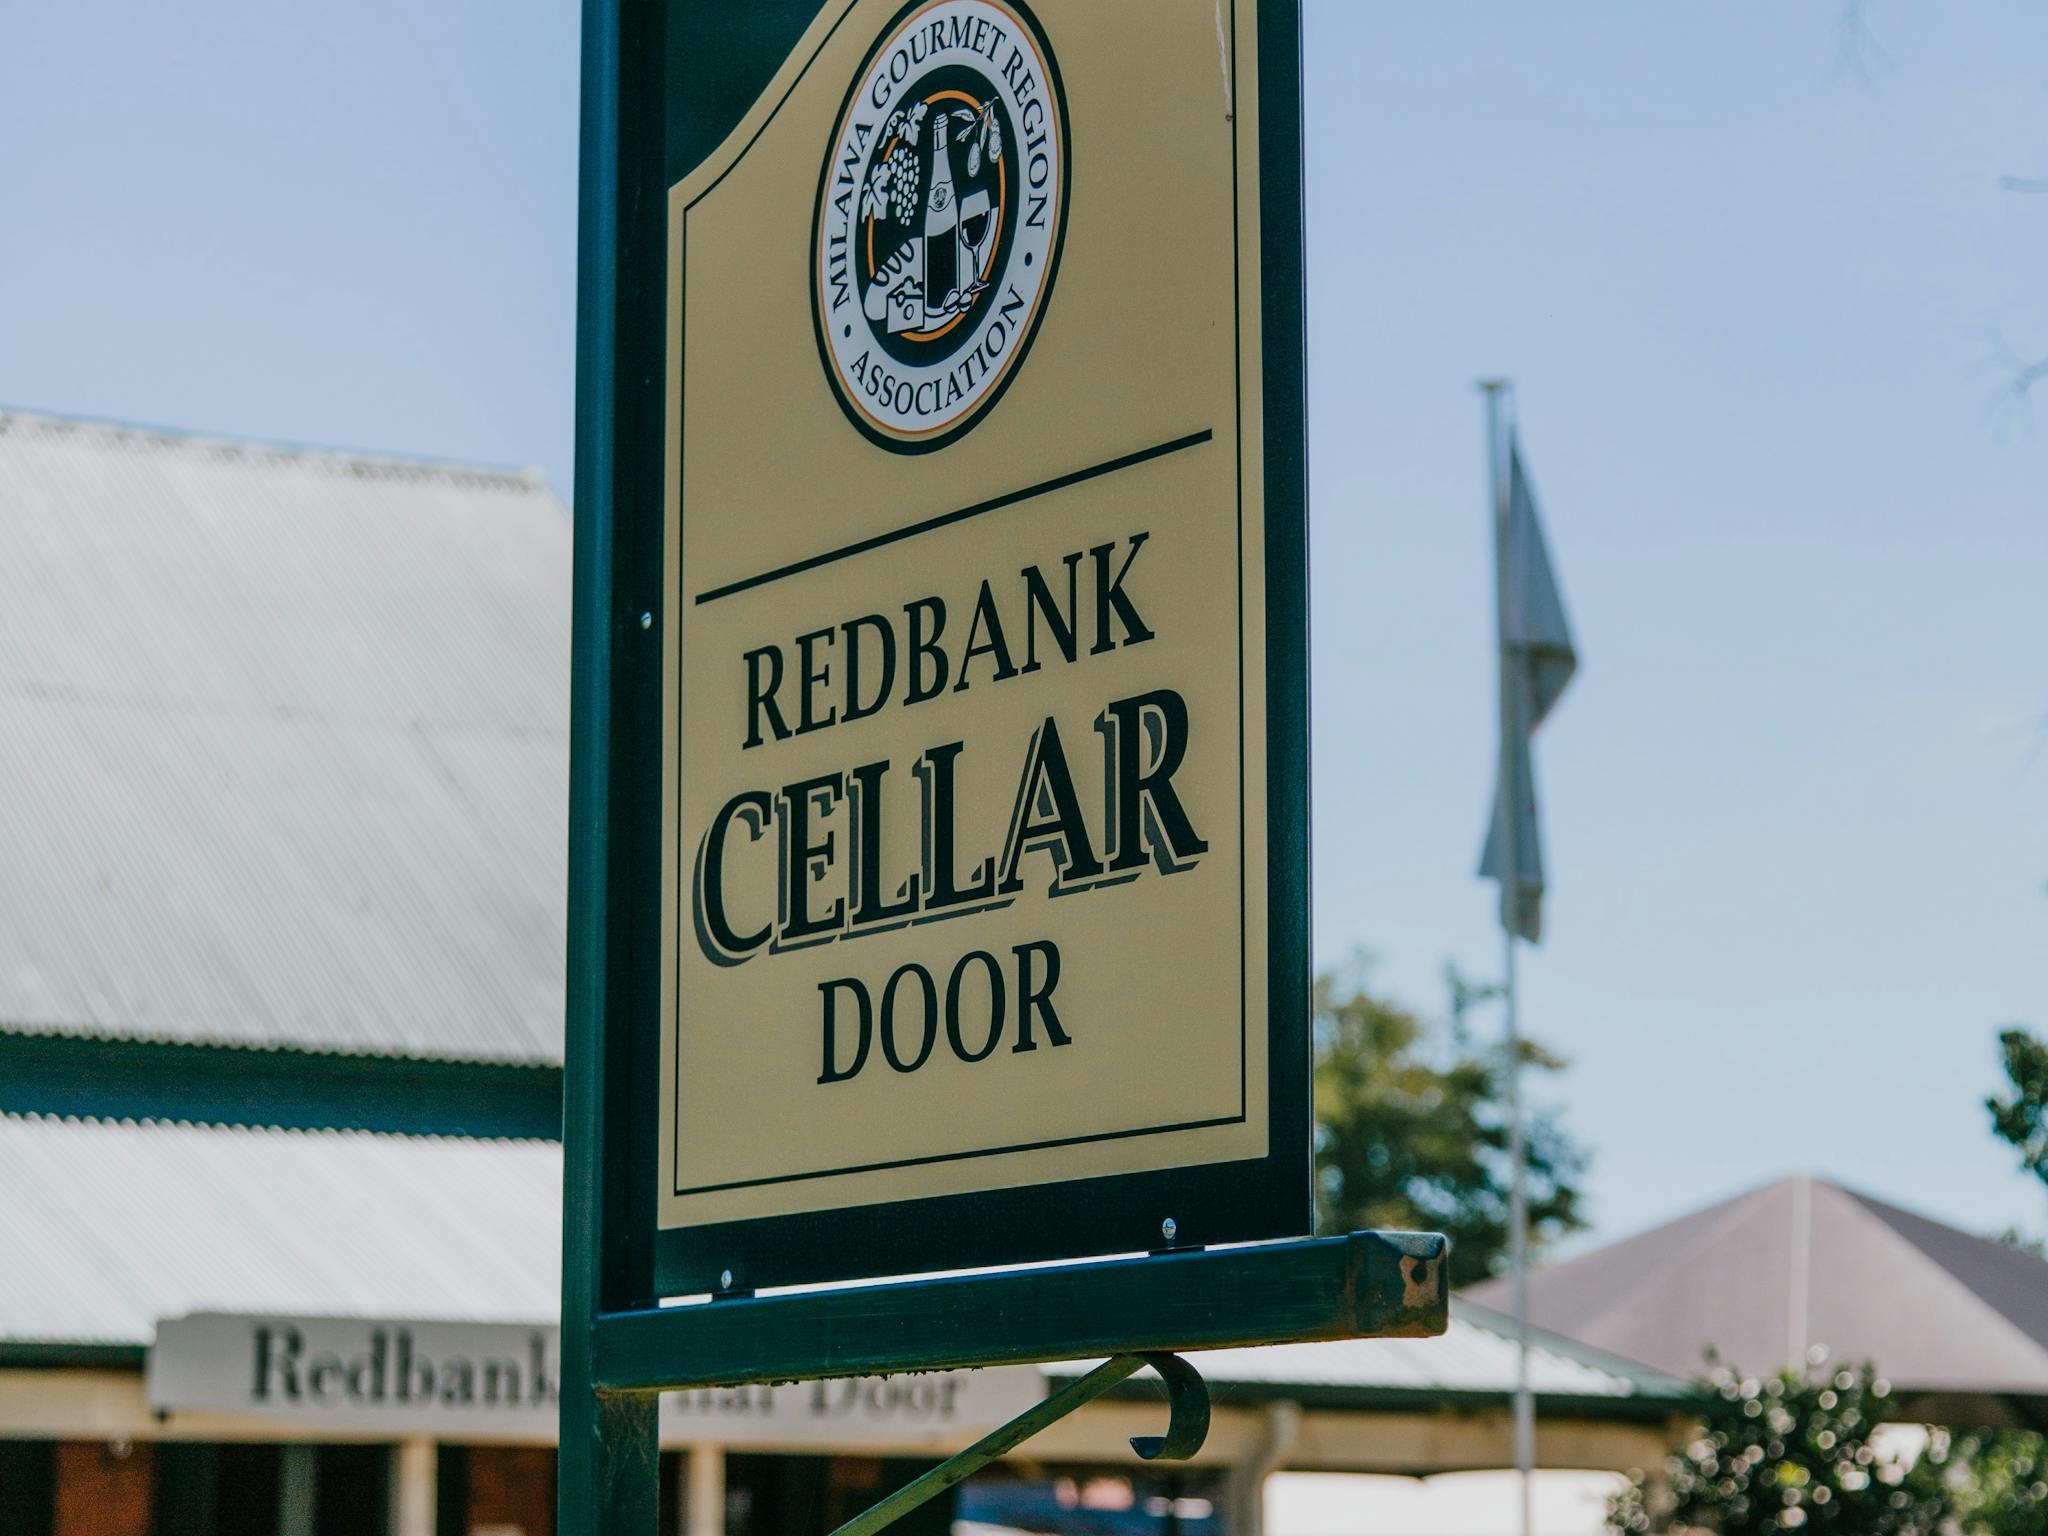 Old fashioned sign advertising cellar door.